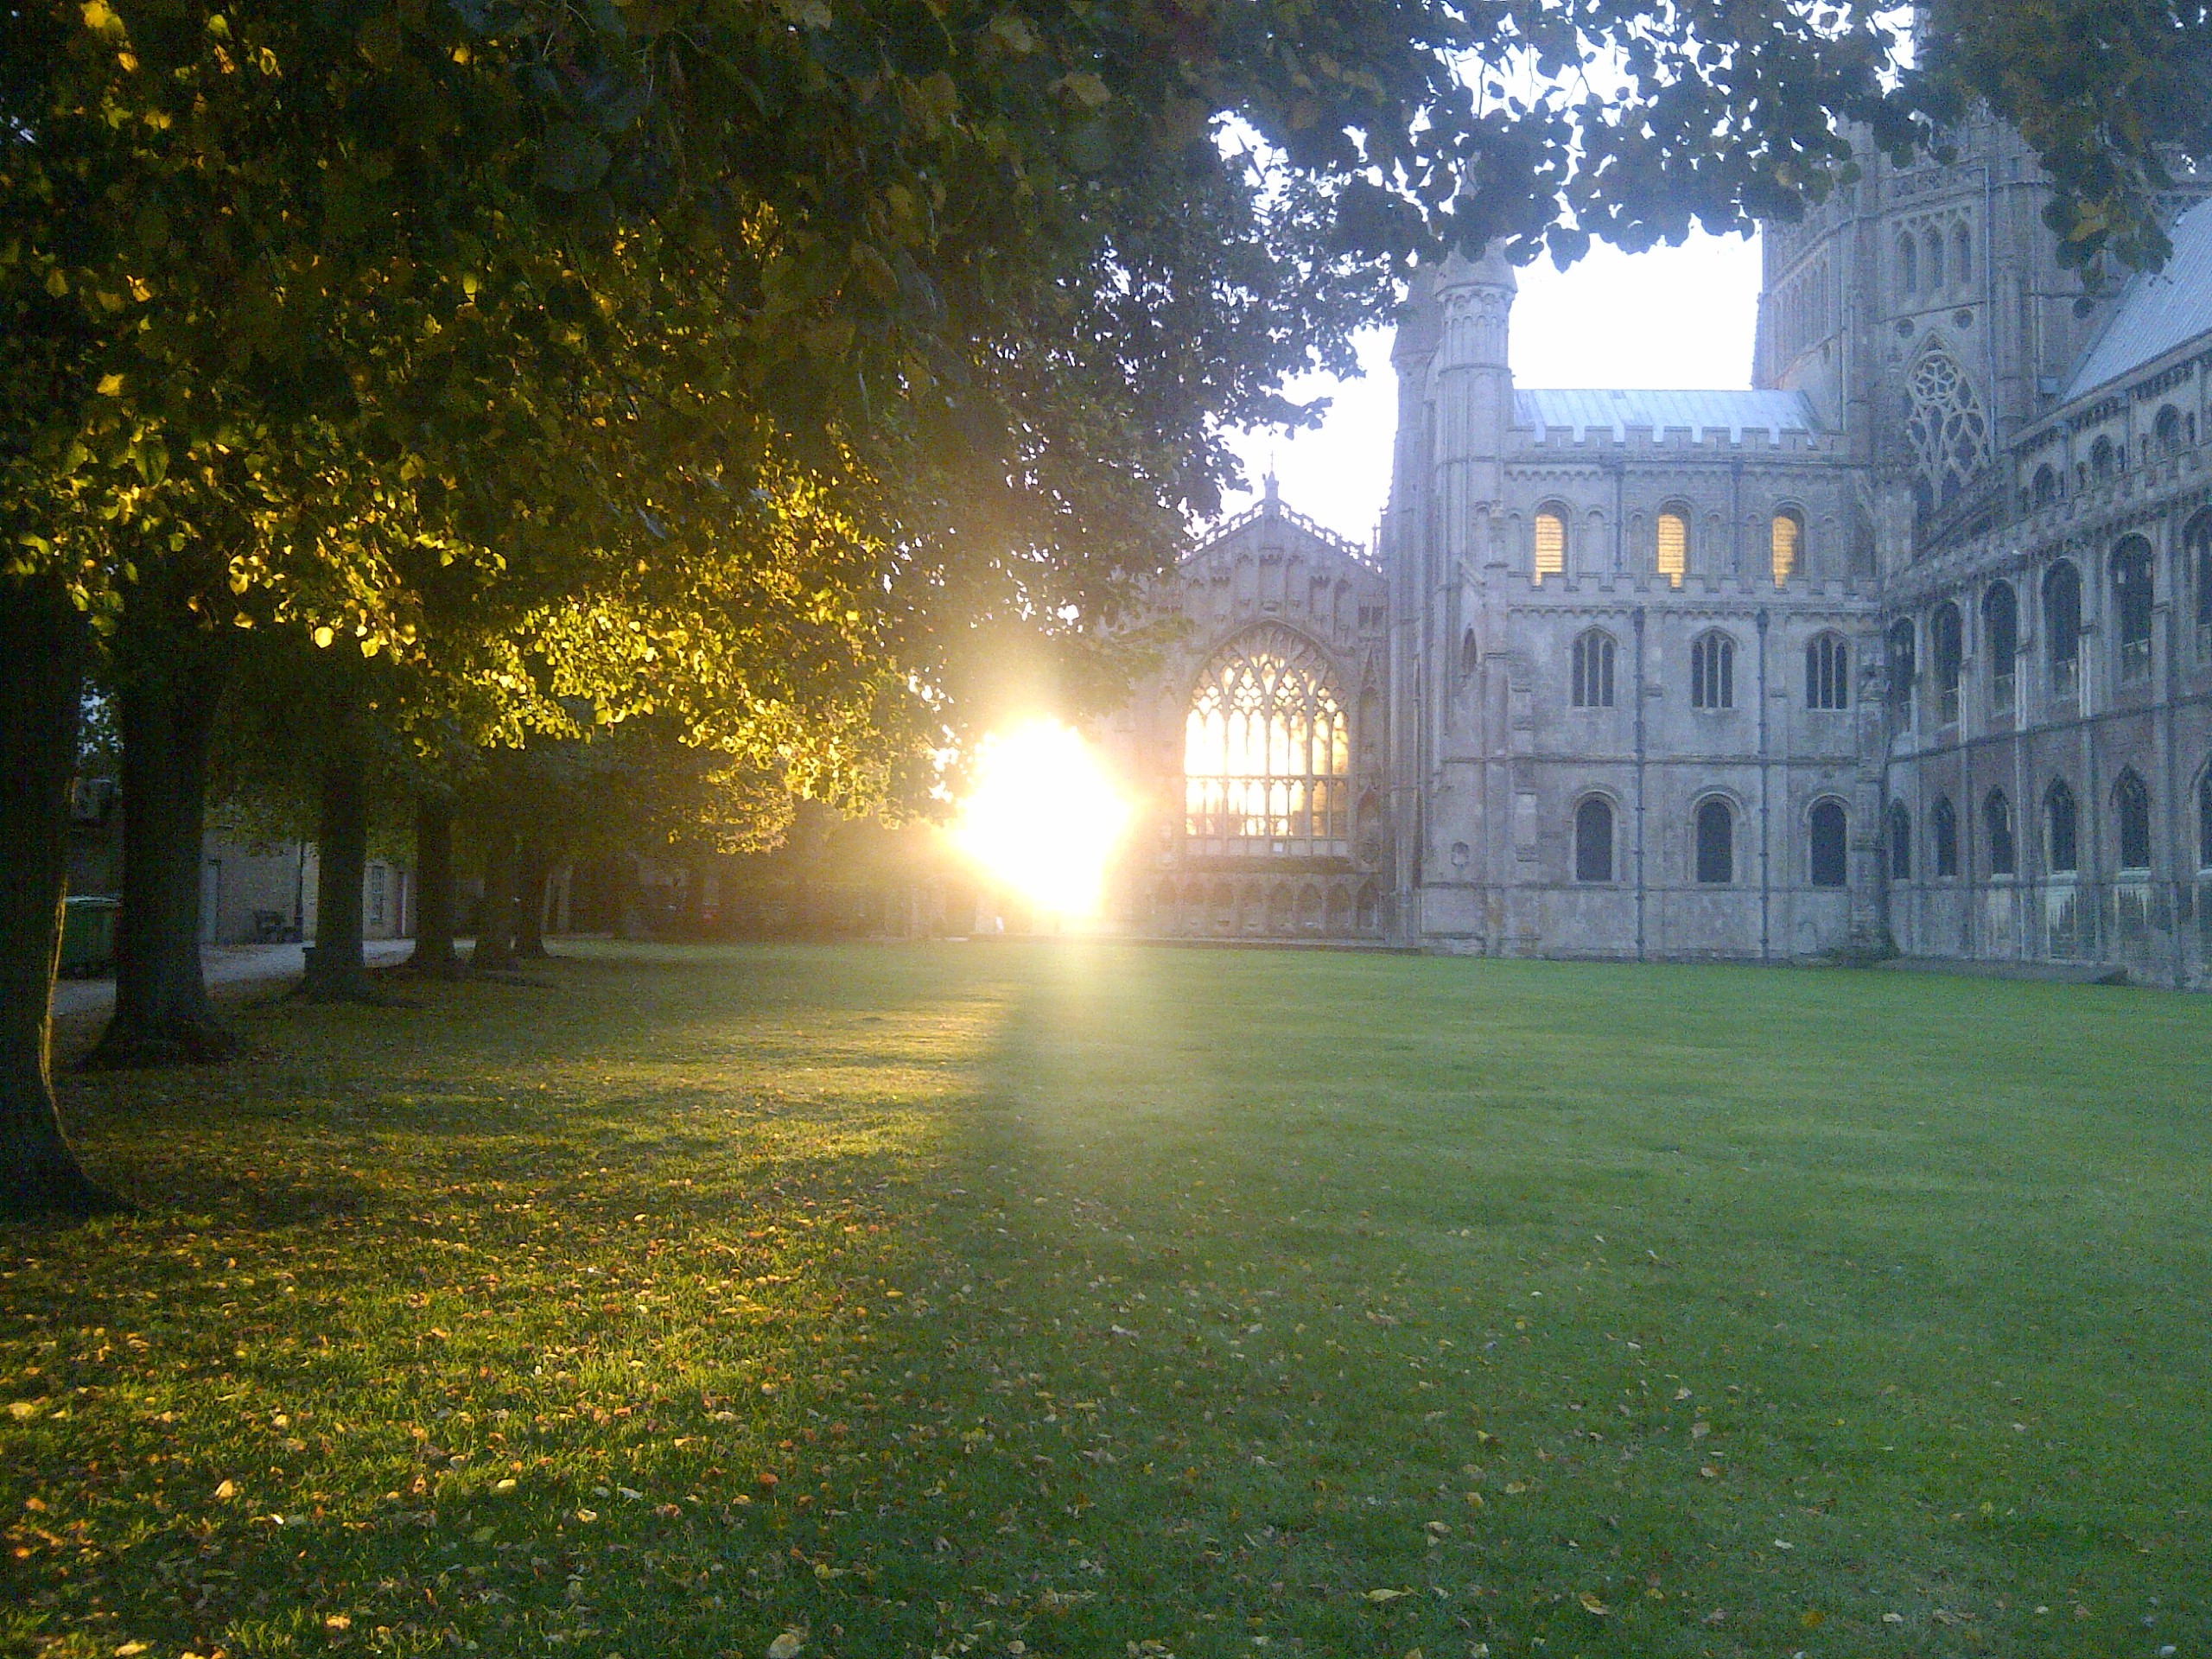 Ely cathedral with the sun rising